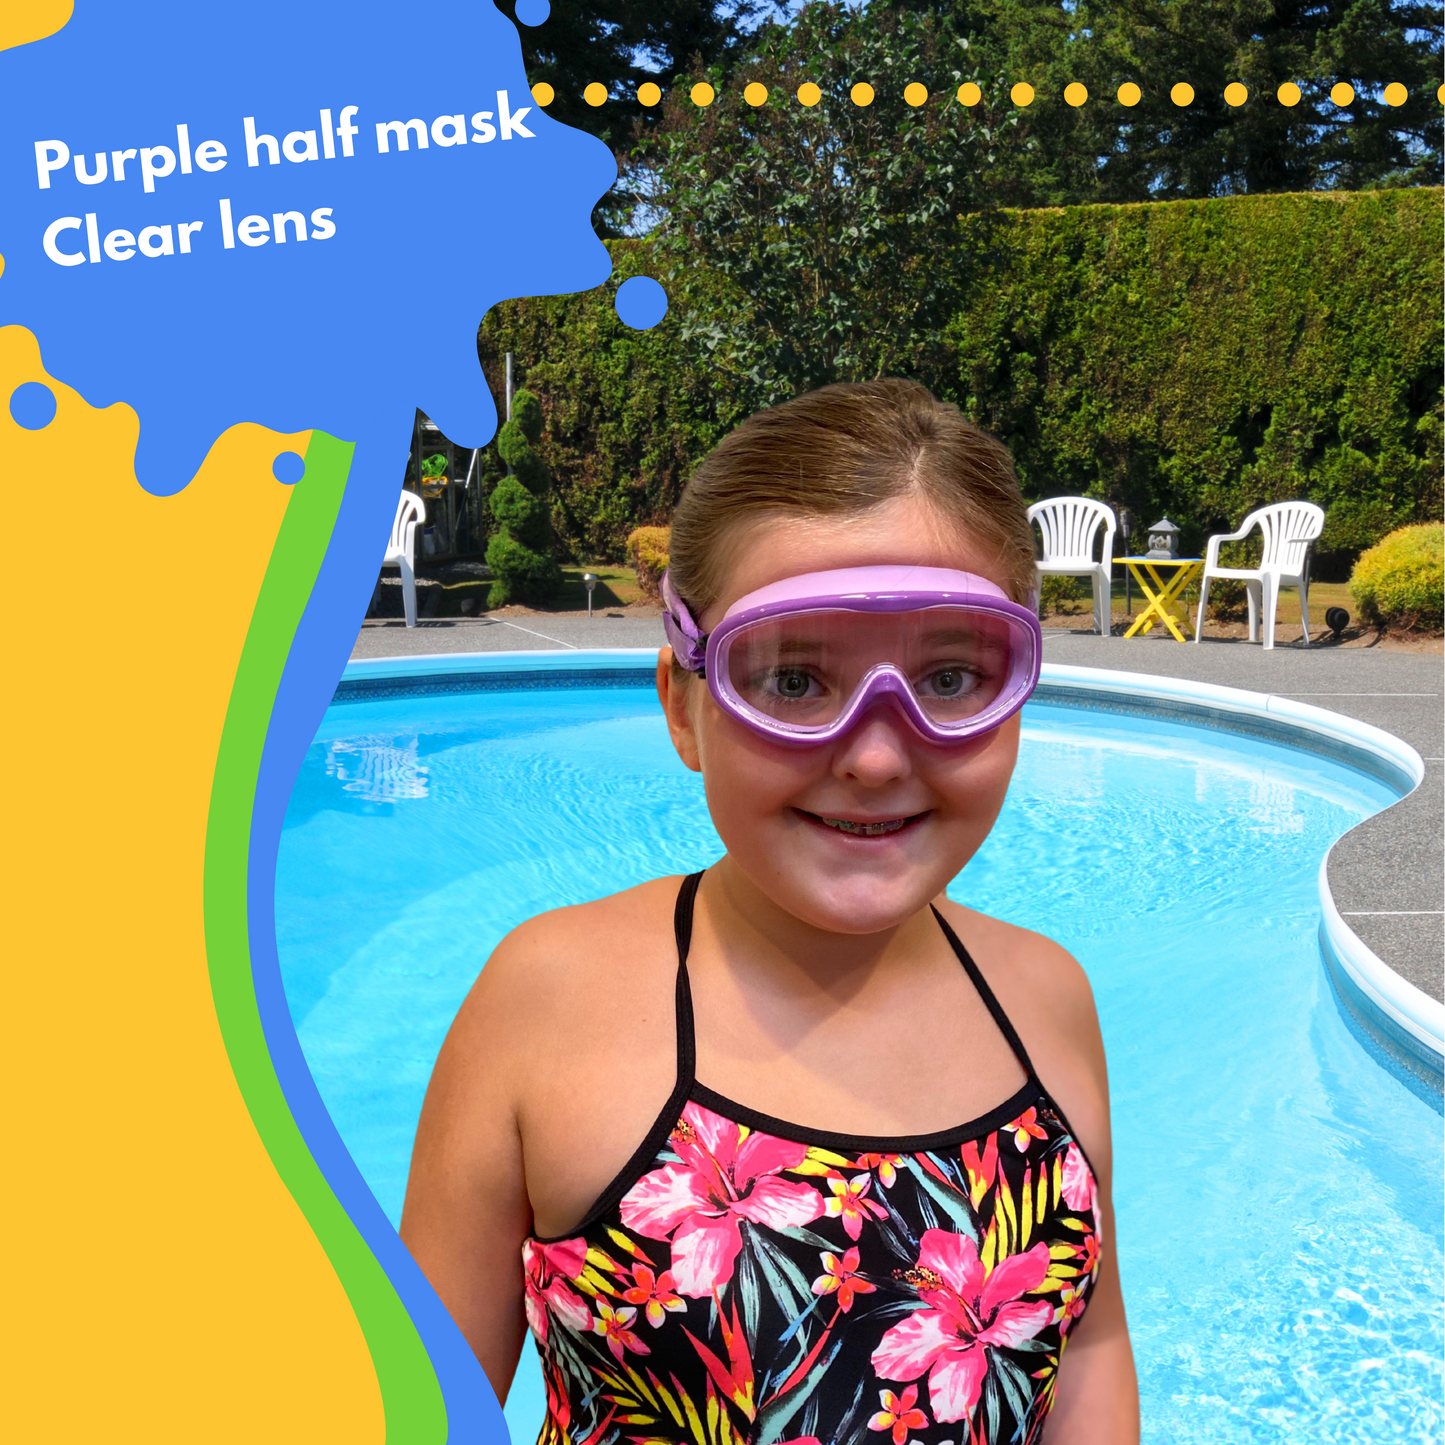 pictured young girl standing at swimming pool wearing frogglez goggles swim mask. text reads purple half mask. clear lens.